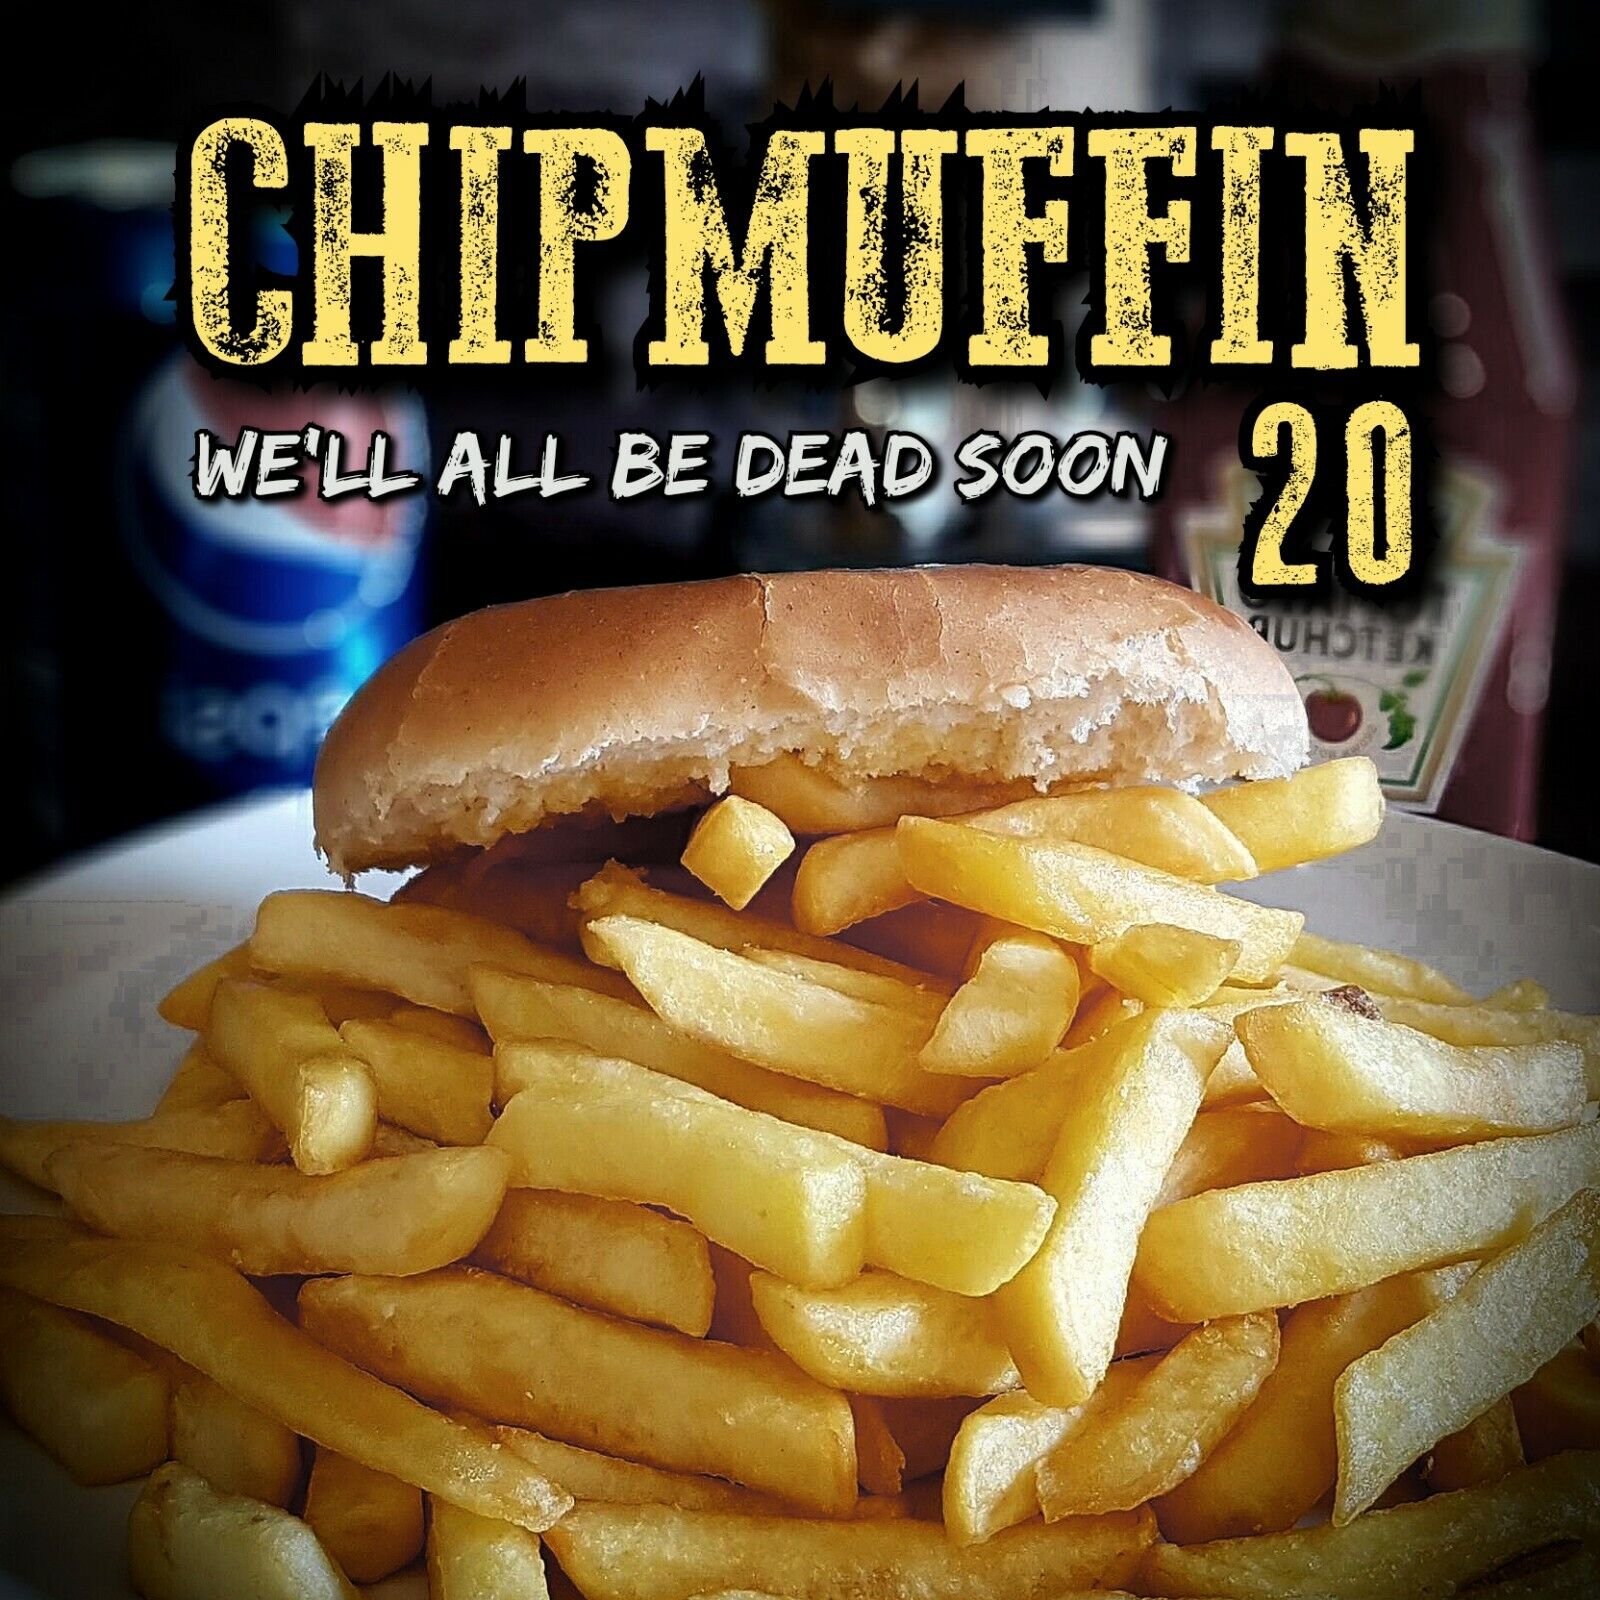 Chipmuffin 20 Manchester Cult band limited edition CD